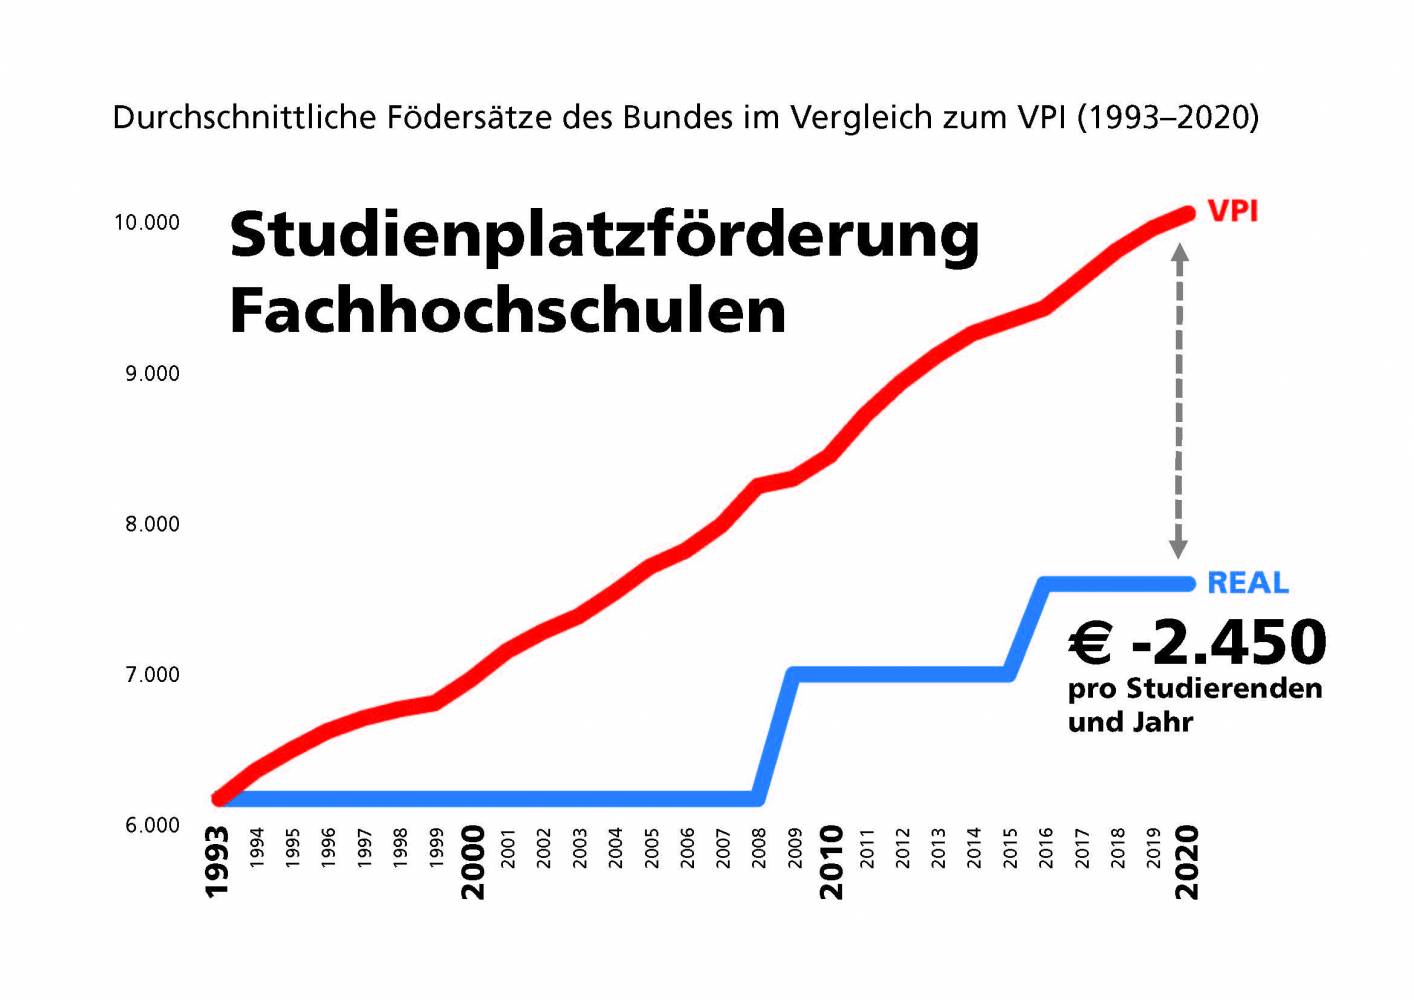 The real loss in value of the federal funding levels for study placesrepresents 2,450 Euros or 25%. Graphic: FHK